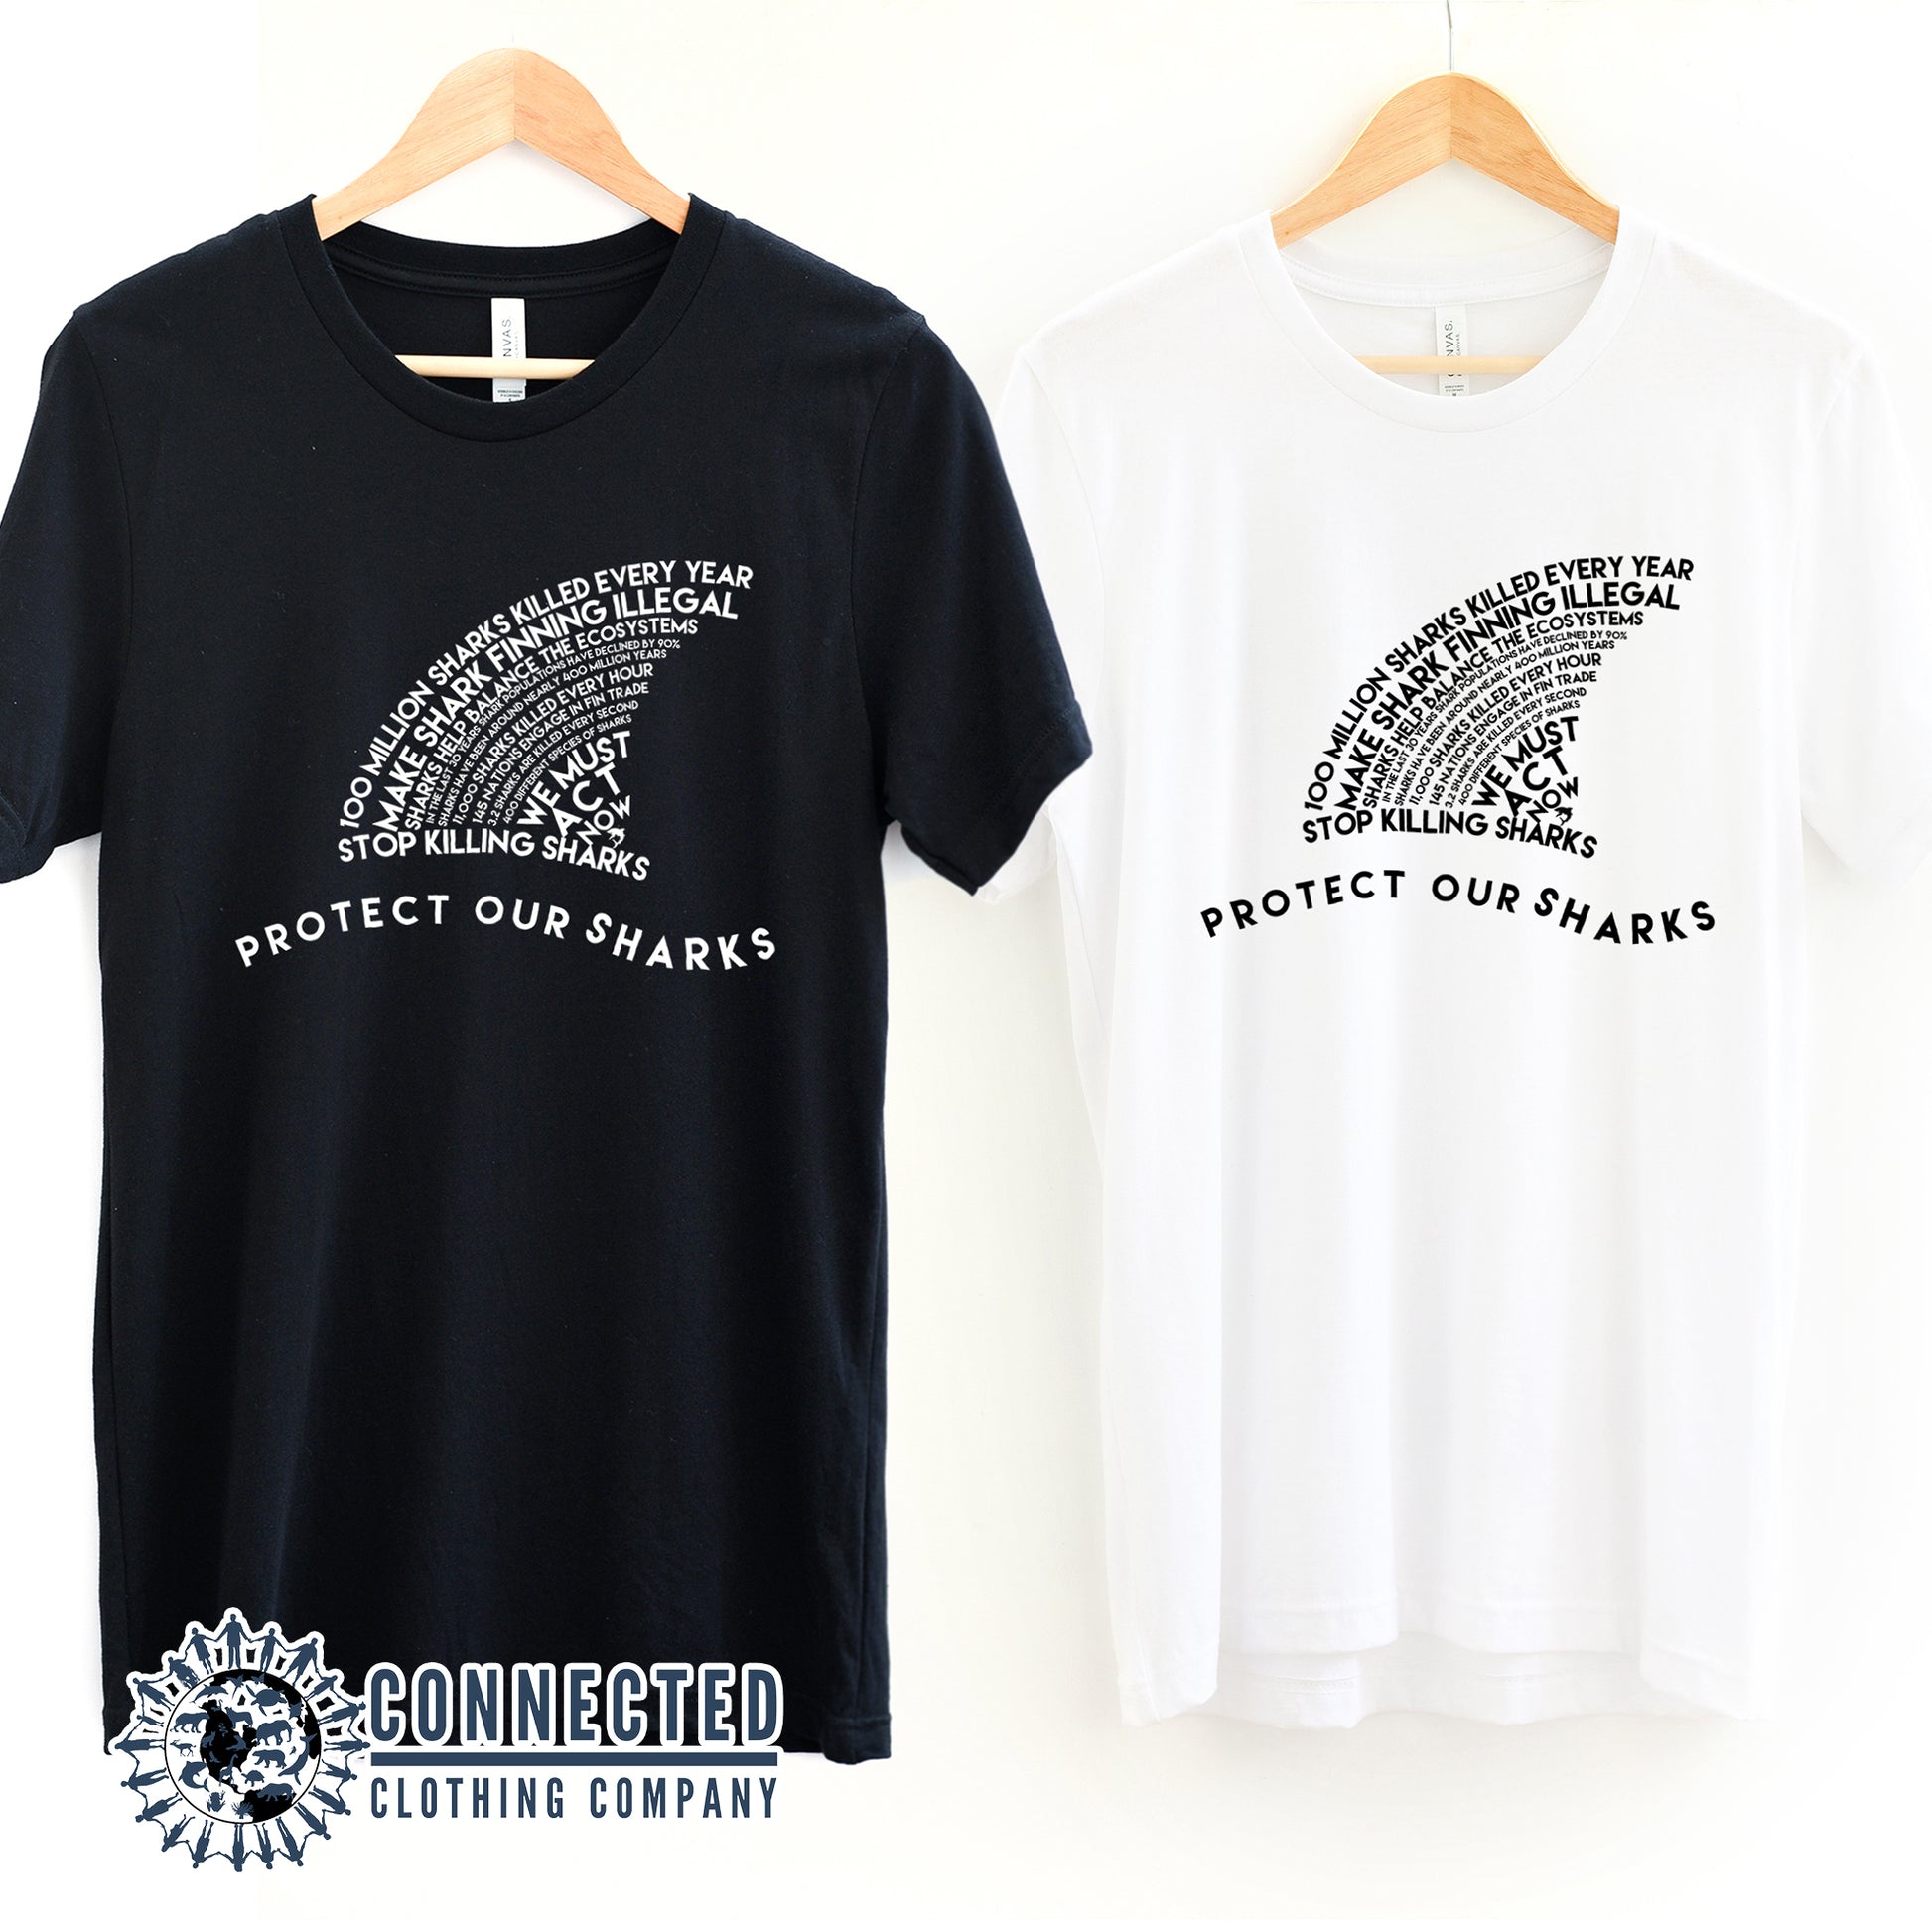 Organic Cotton Protect Our Sharks Short-Sleeve Tee - Connected Clothing Company - 10% of profits donated to shark conservation